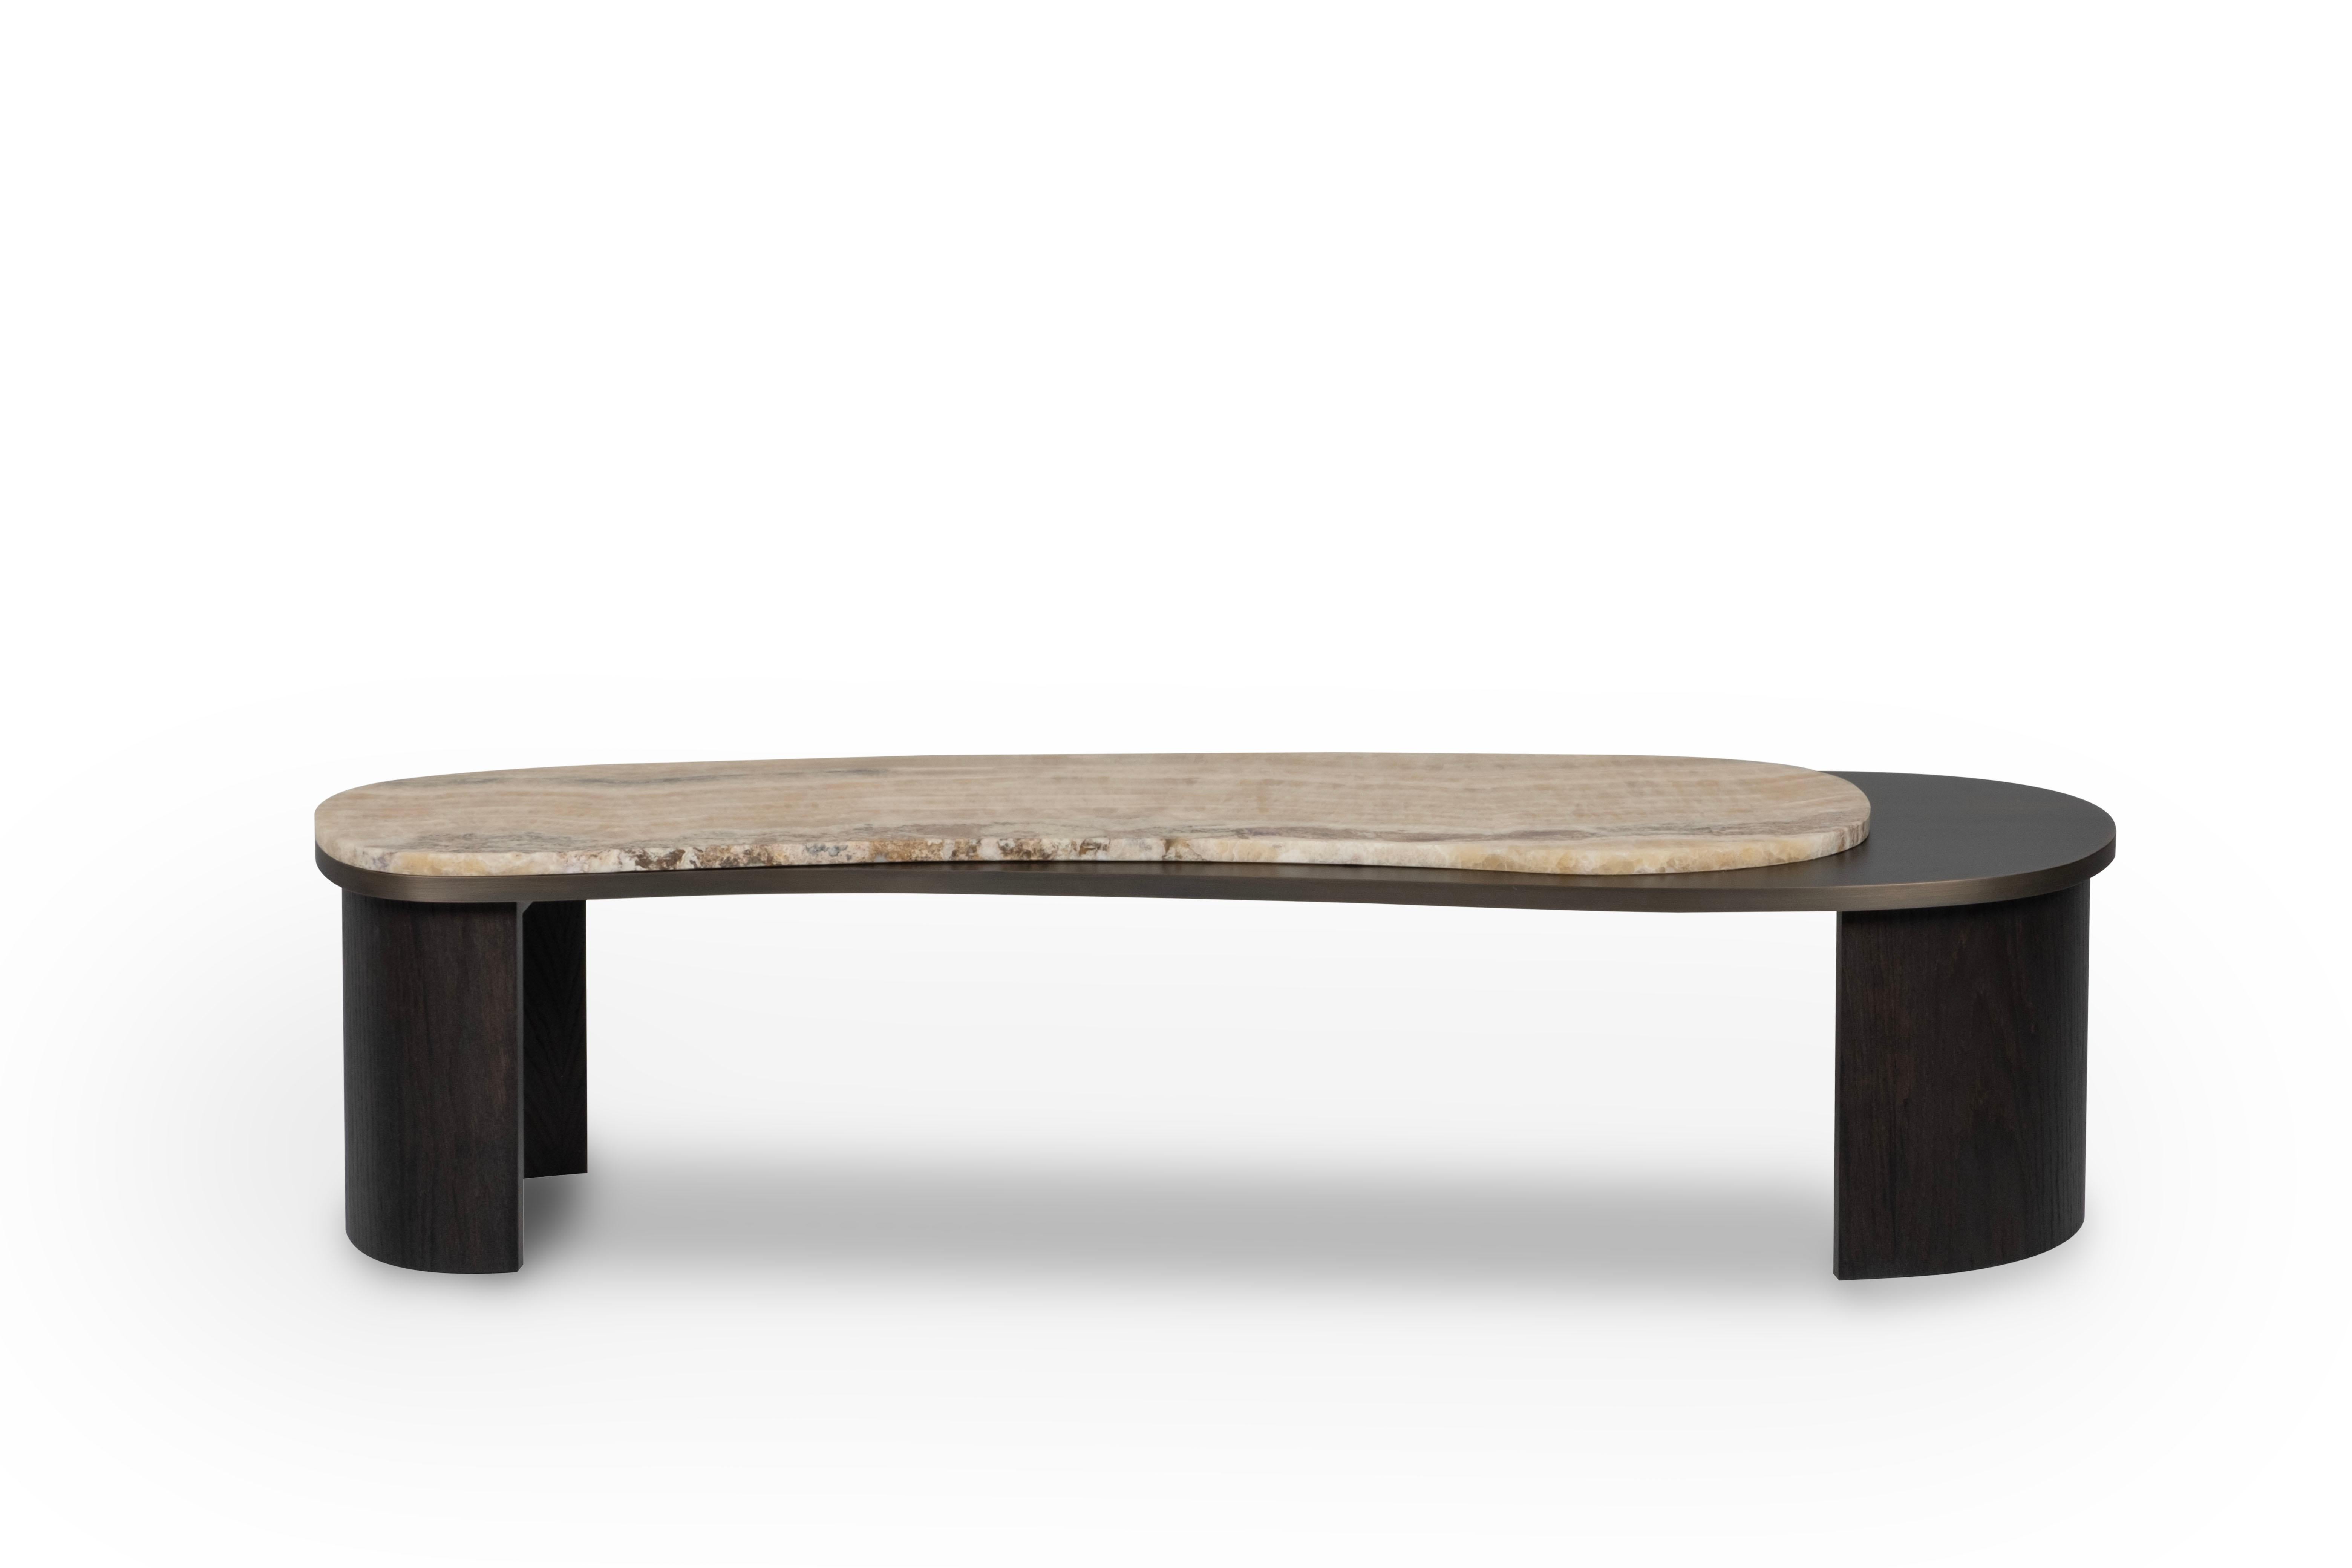 Armona Coffee Table, Contemporary Collection, Handcrafted in Portugal - Europe by Greenapple.

Designed by Rute Martins for the Contemporary Collection, the Armona modern coffee table pays homage to the natural beauty and organic lines of Armona